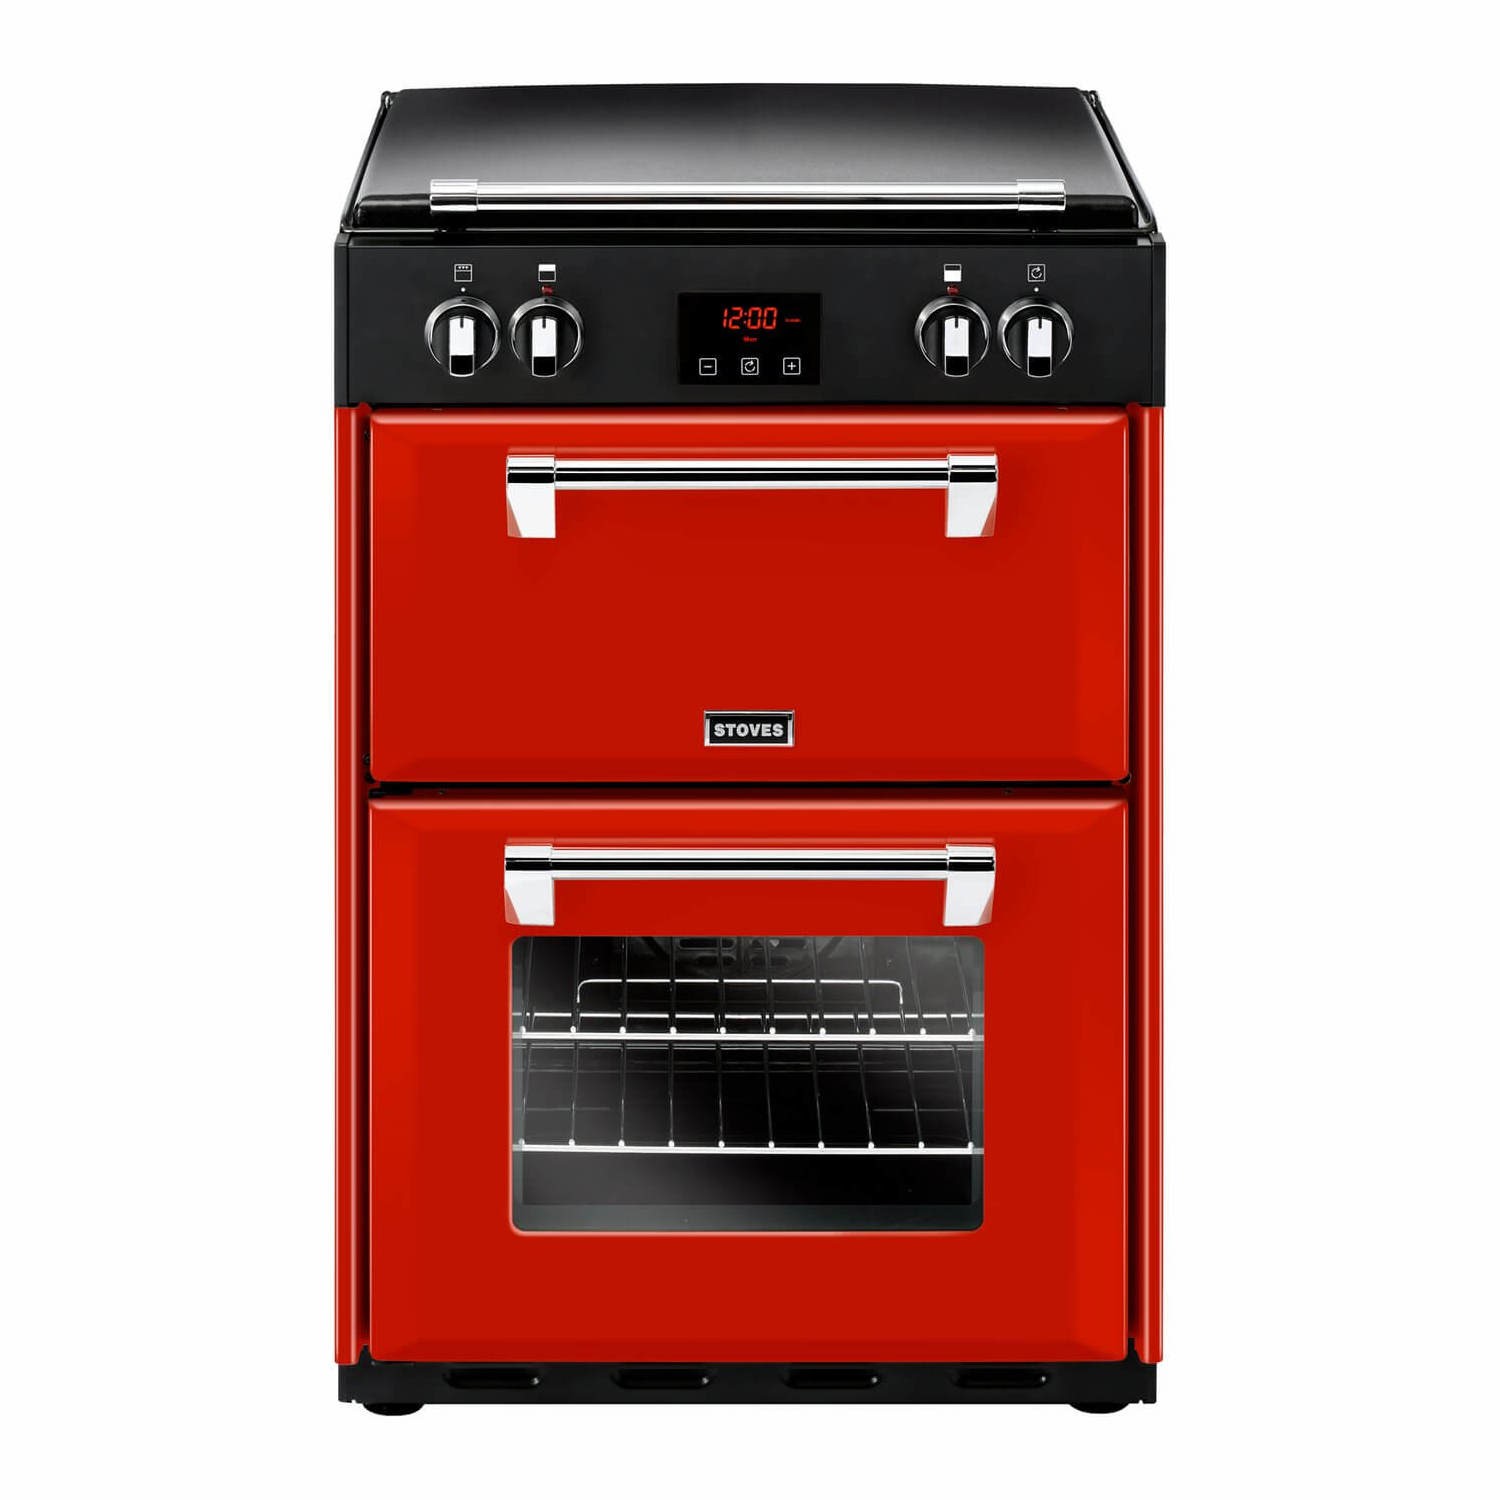 Stoves Richmond 600EI 60cm Double Oven Electric Cooker with Induction Hob - Red